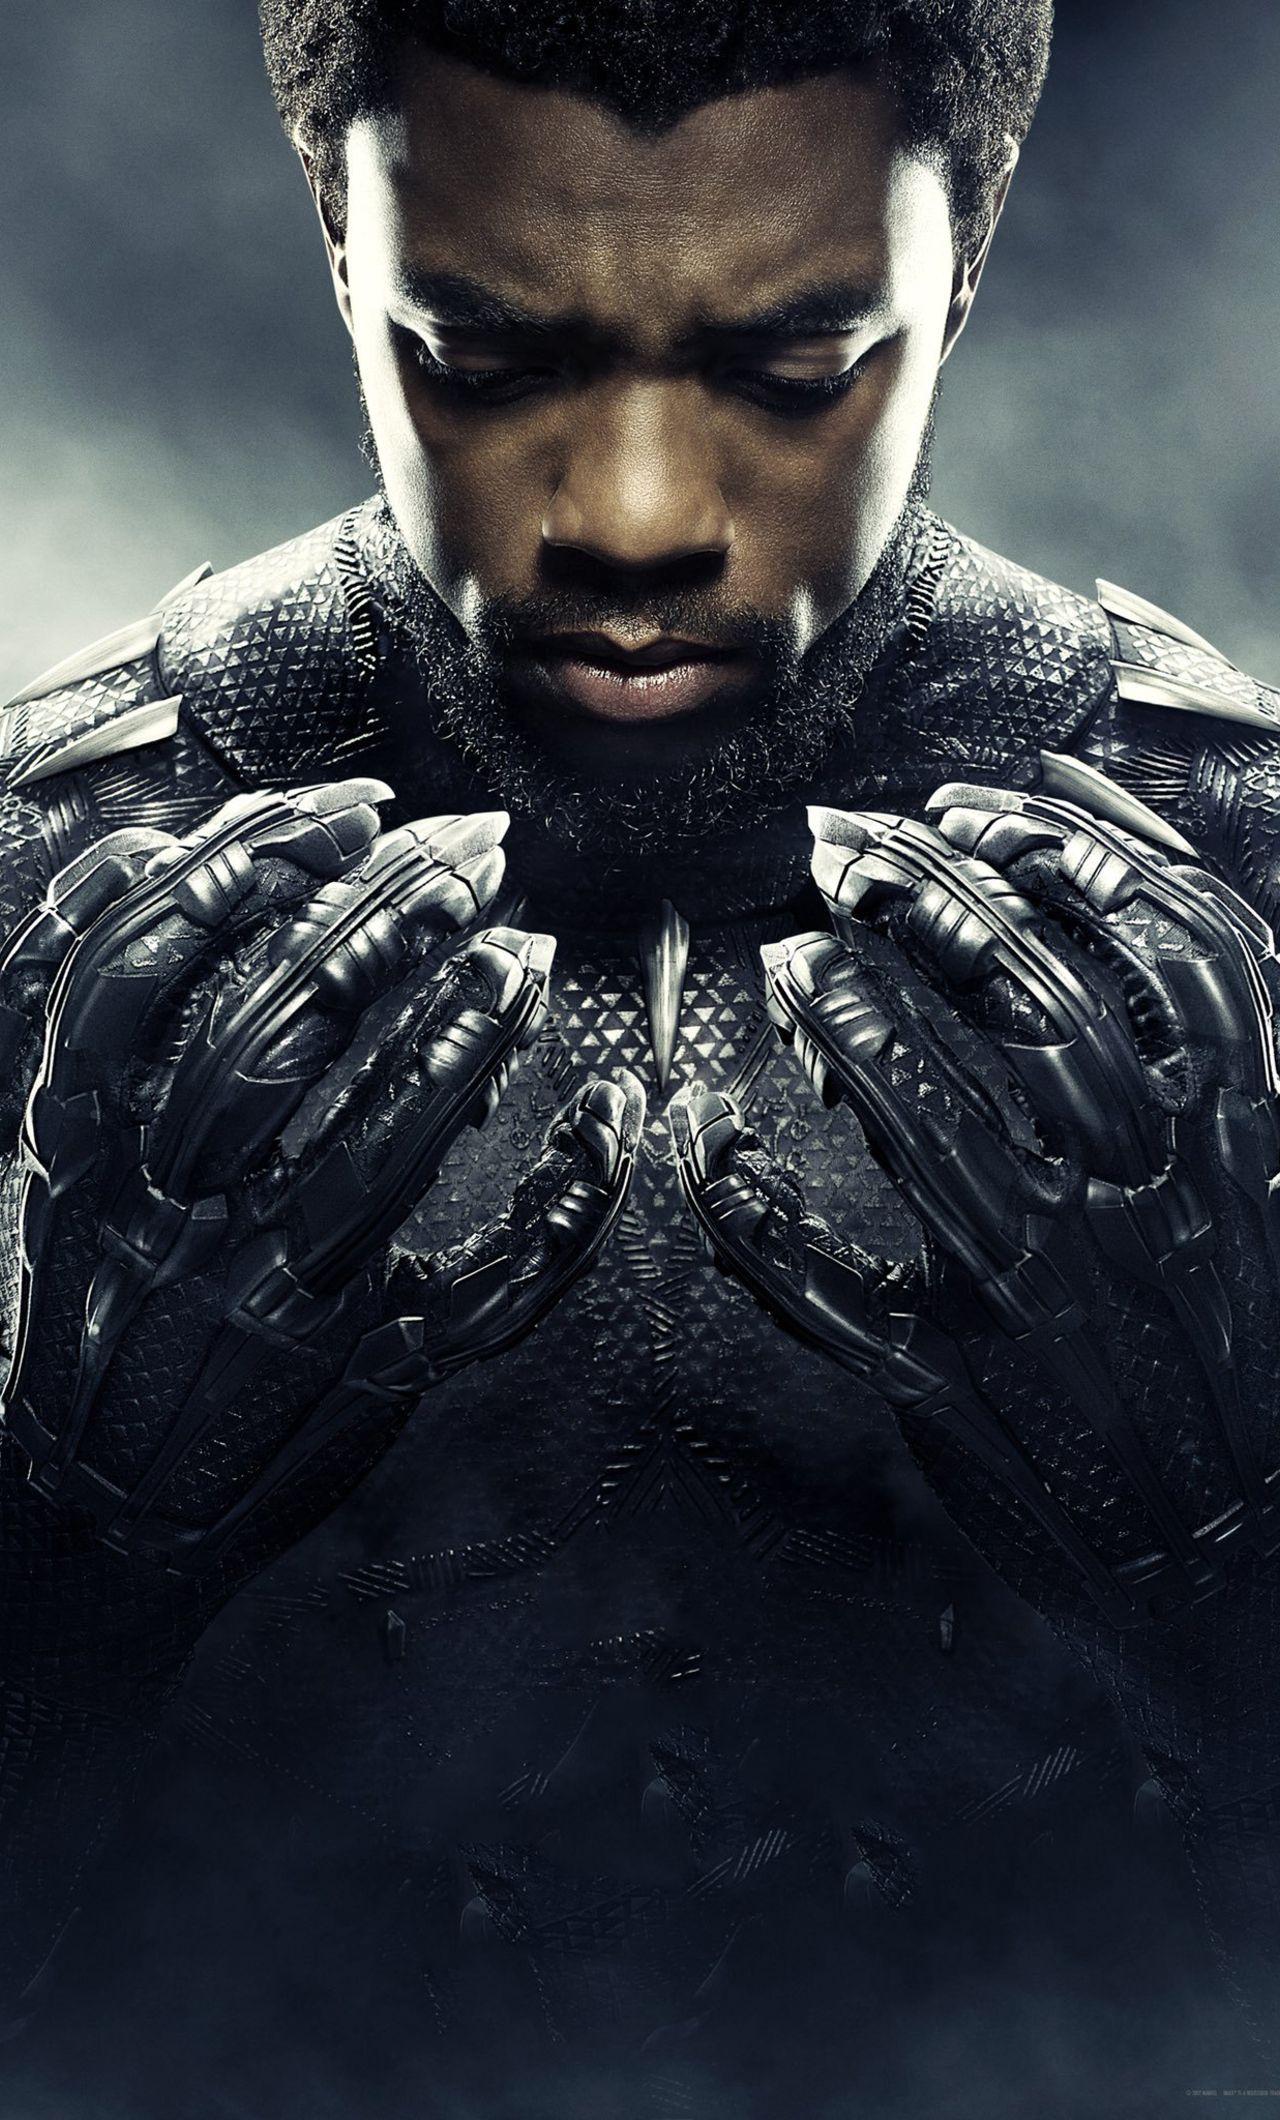 Rip Black Panther Wallpapers Top Free Rip Black Panther Backgrounds Wallpaperaccess